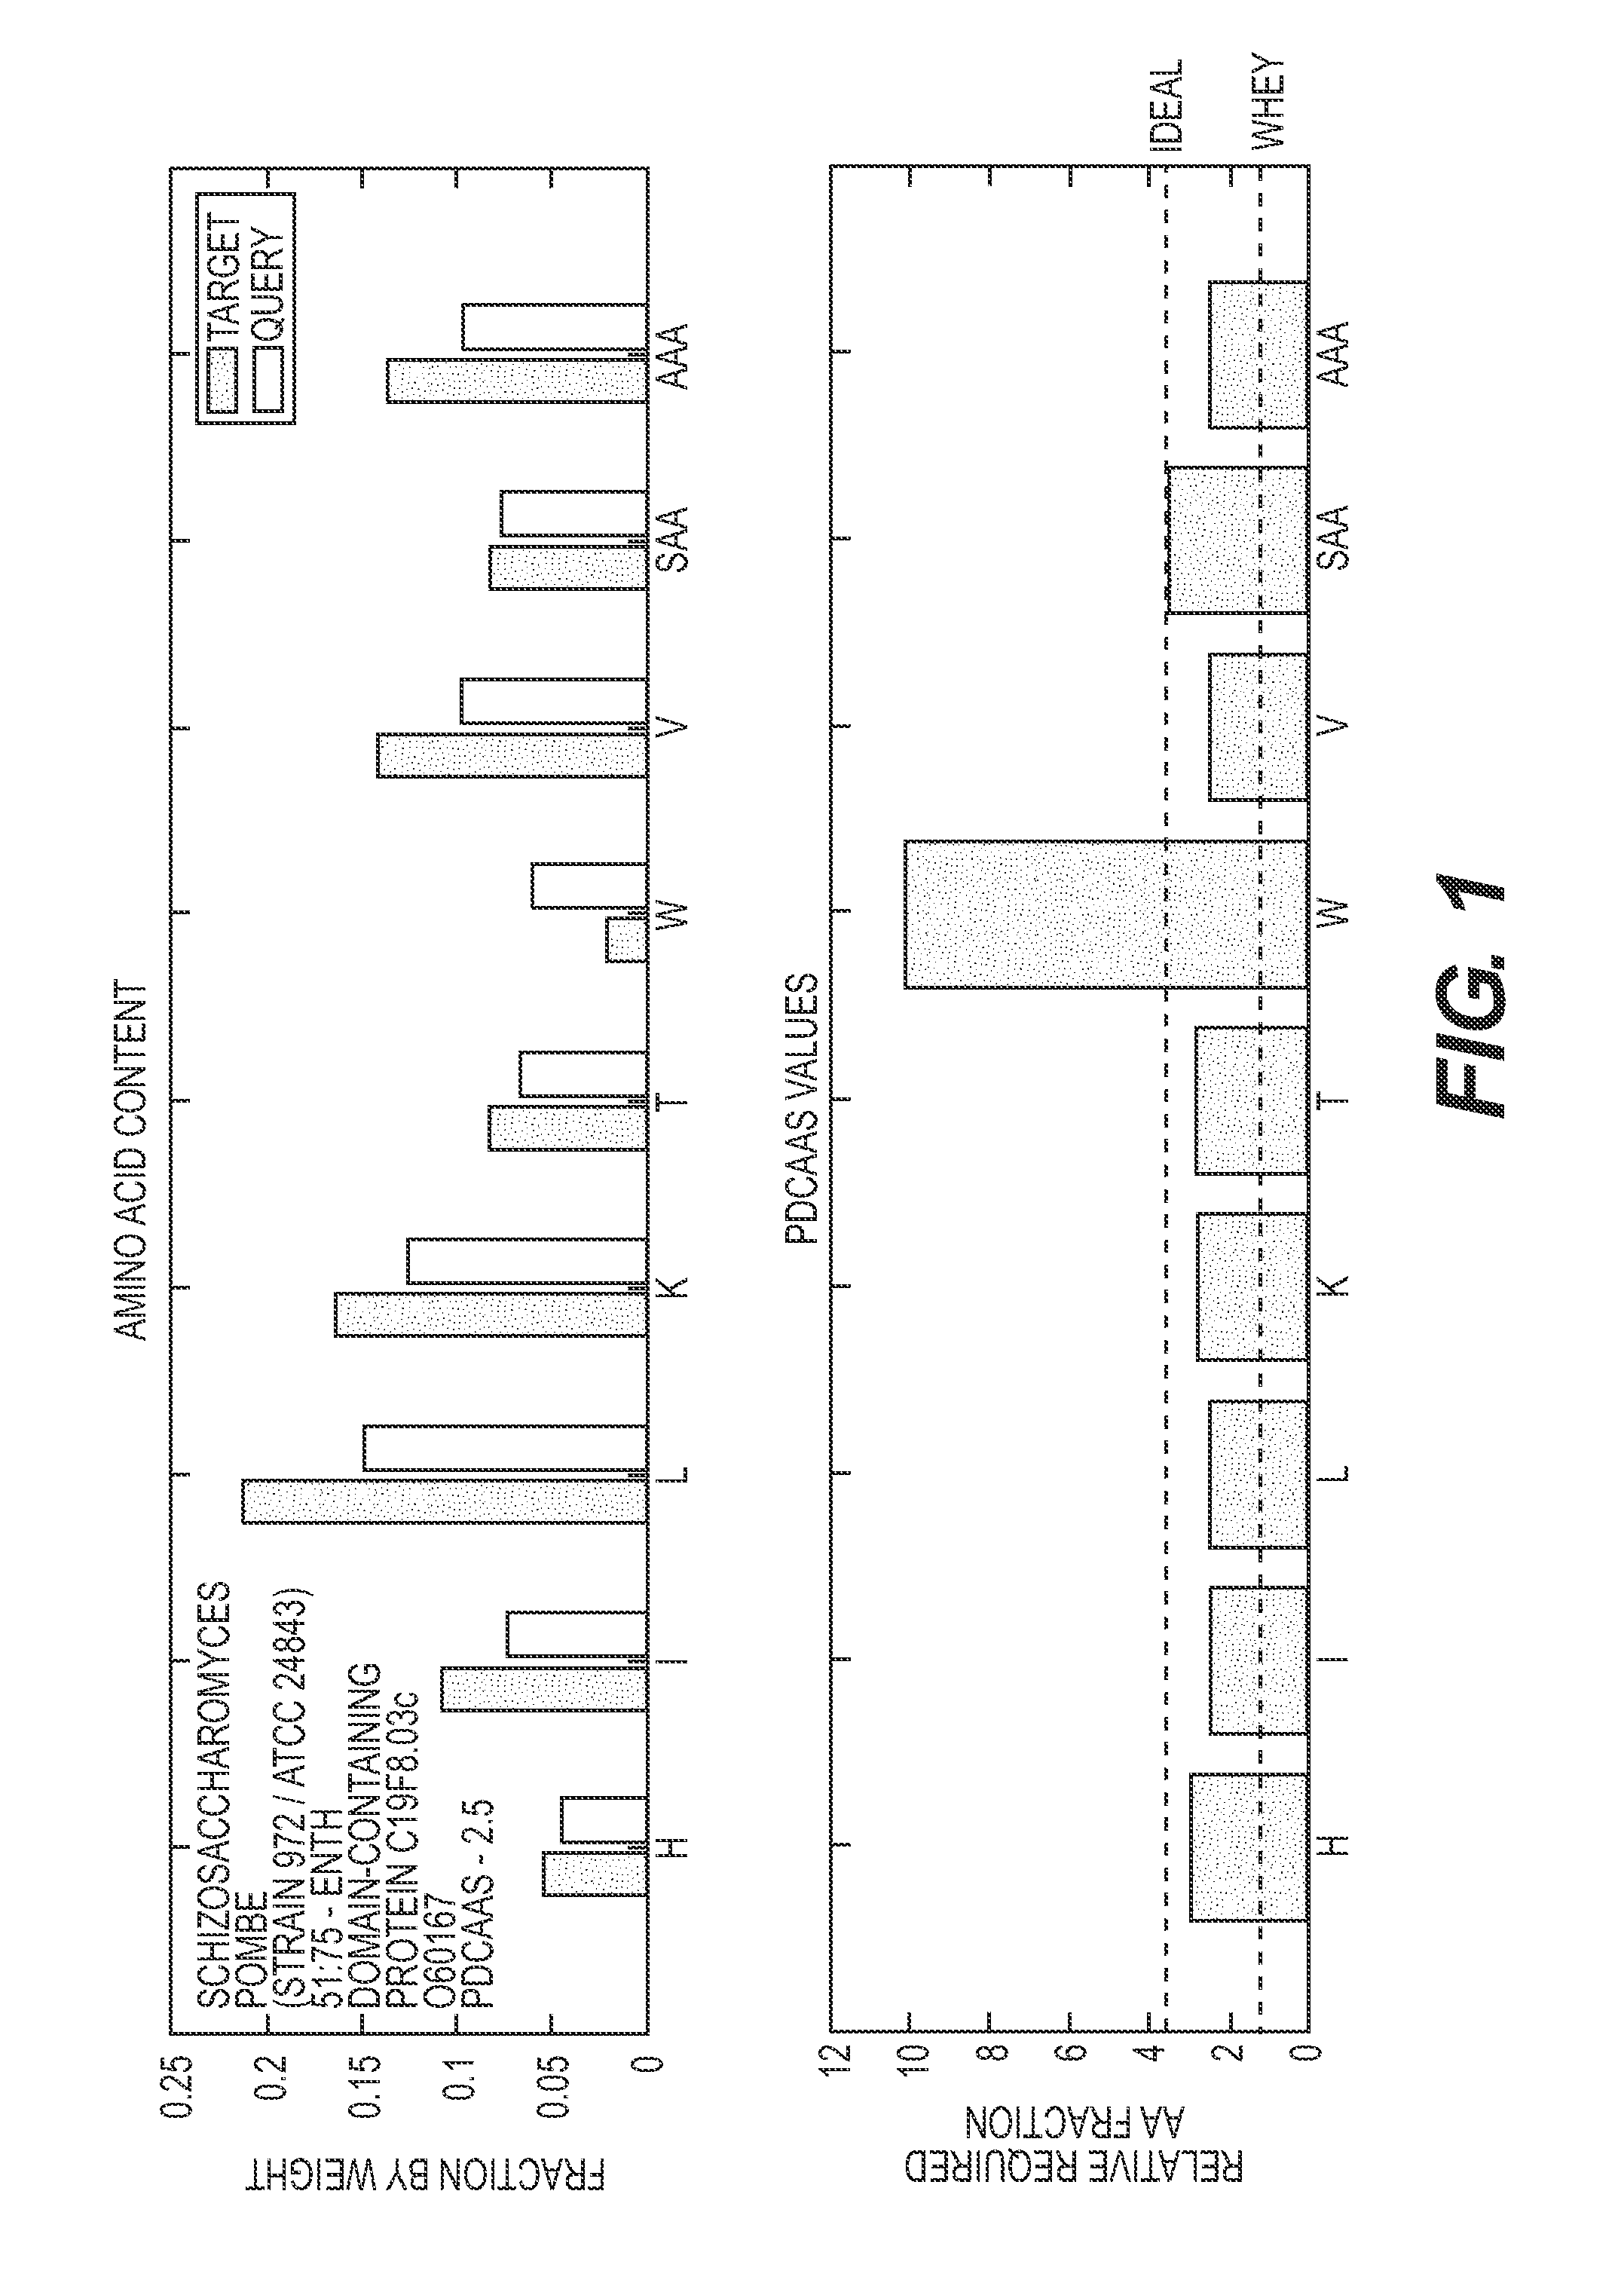 Nutritive Fragments, Proteins and Methods